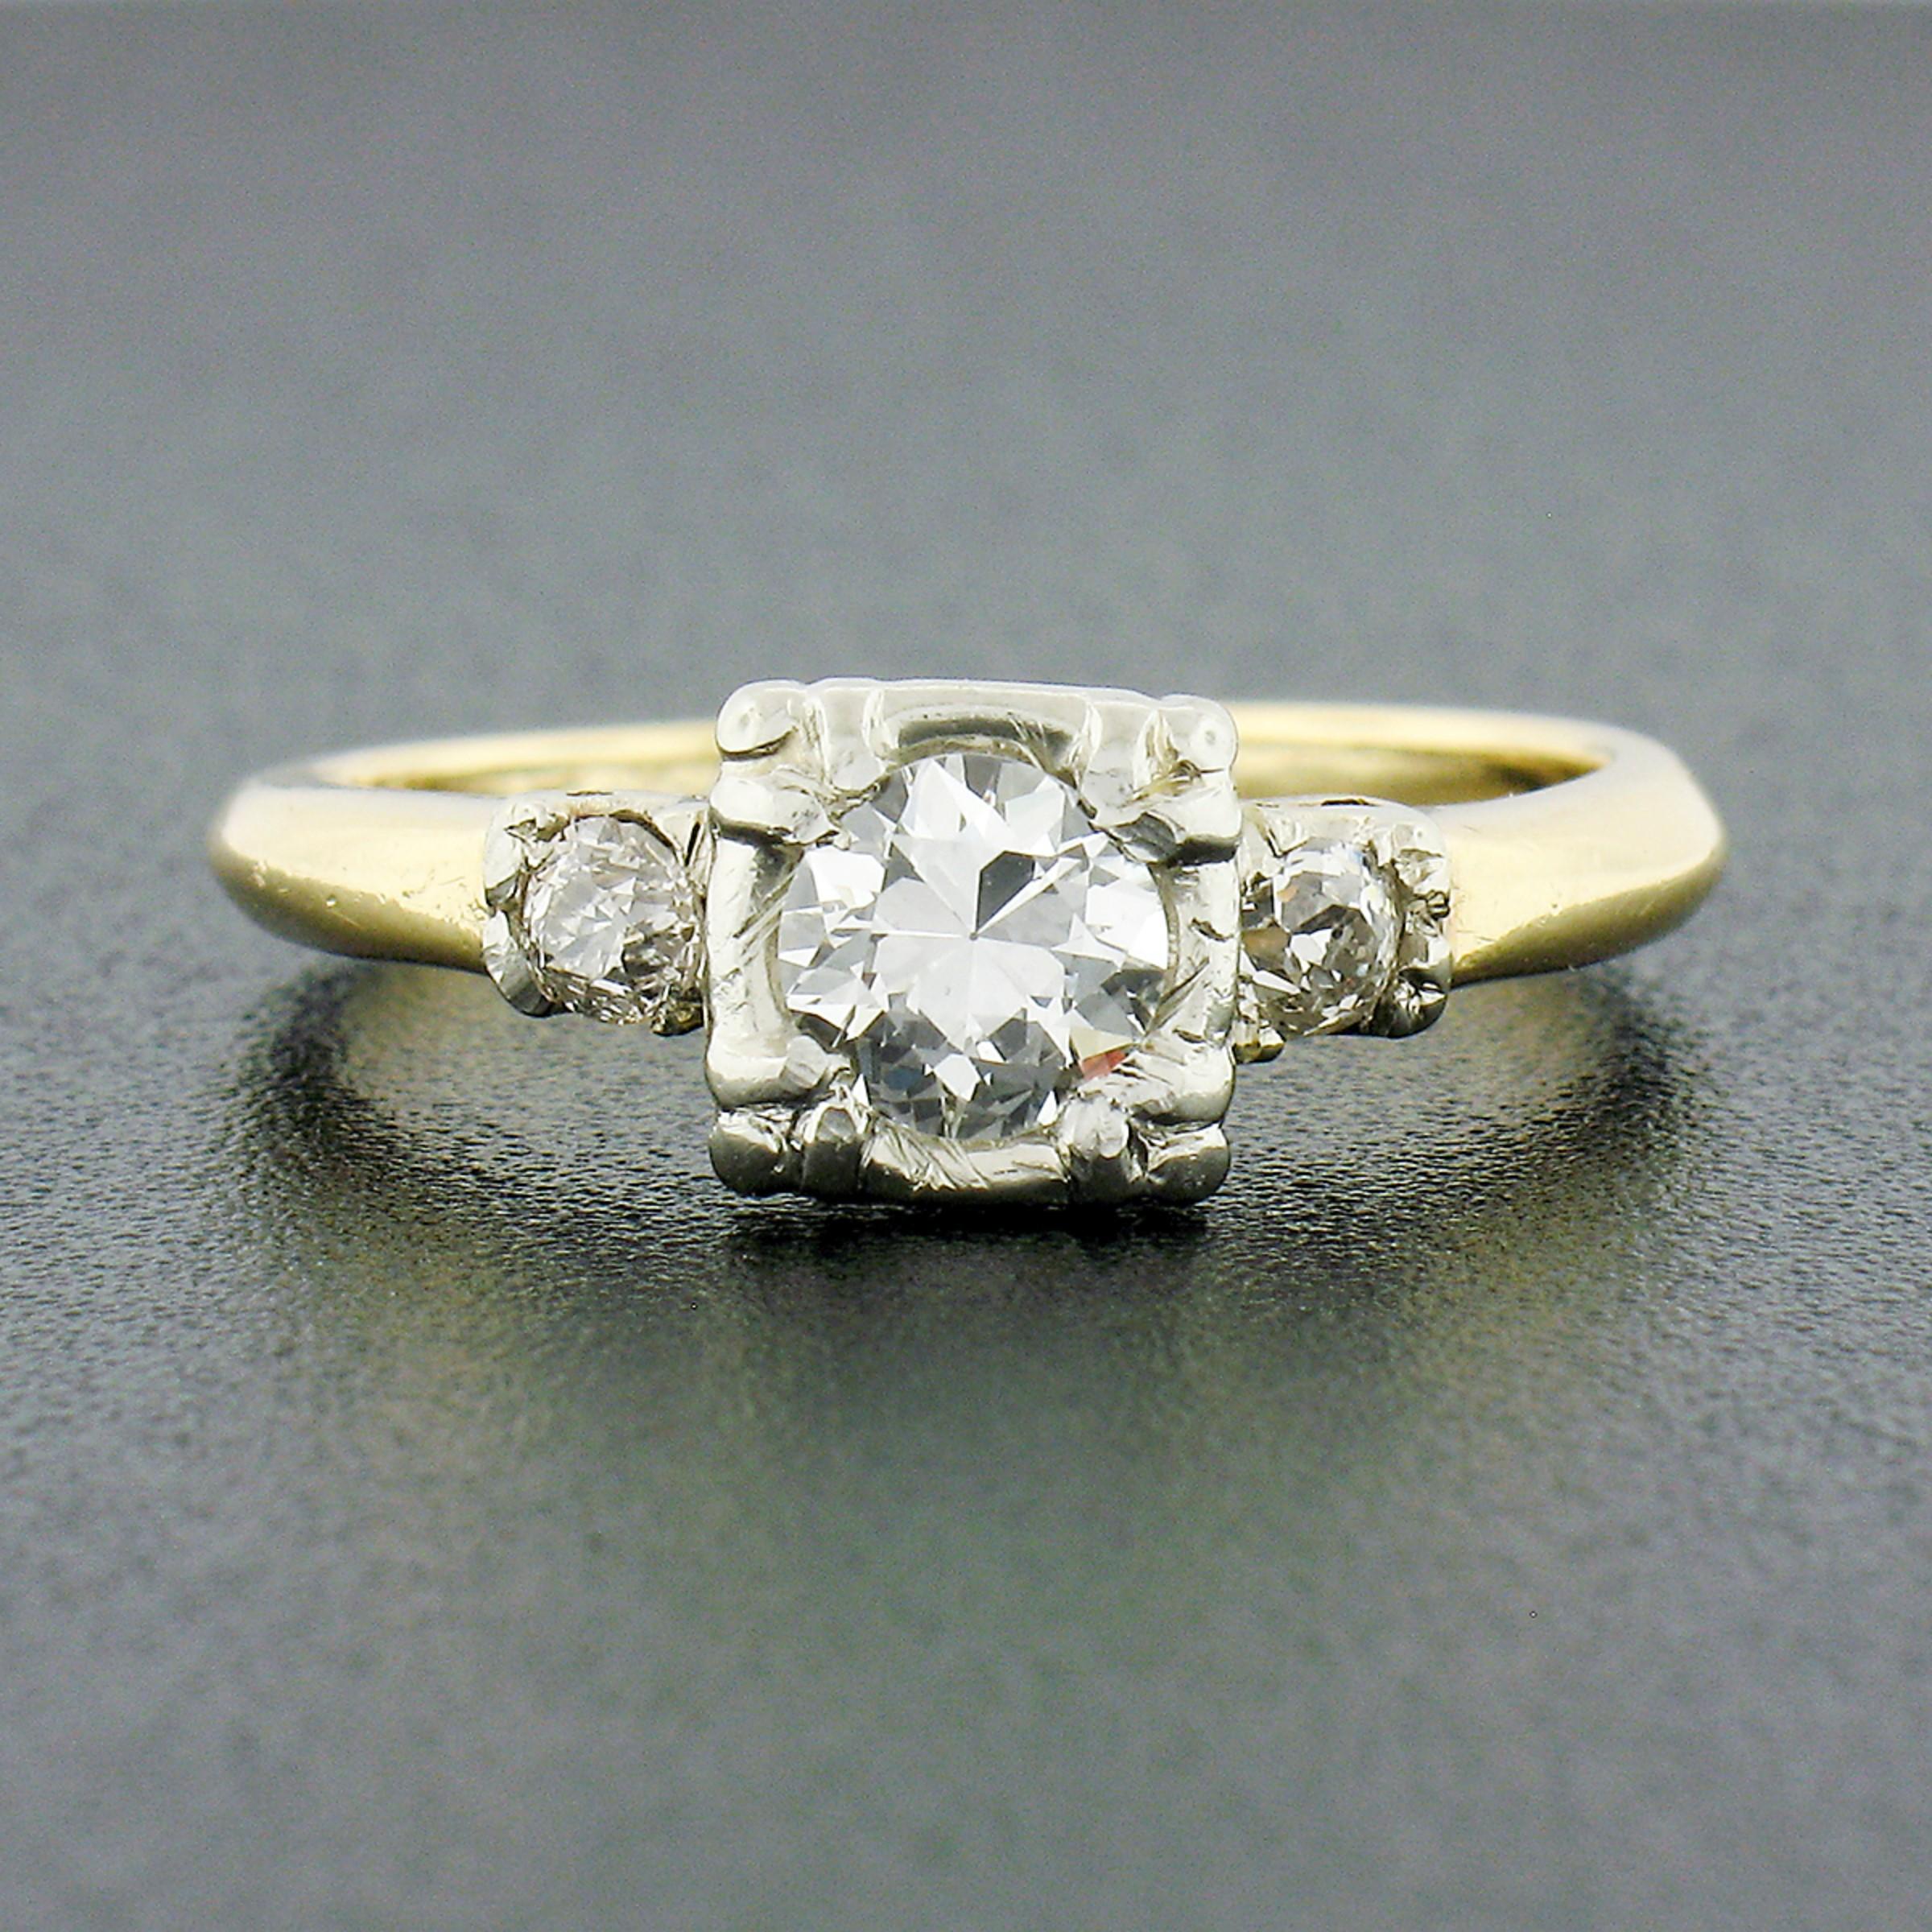 Here we have a gorgeous, vintage, diamond engagement ring that was crafted from solid 14k yellow and white gold. It features an old European cut diamond neatly set at the center, weighing approximately 1/2 carat, and displaying an amazing amount of